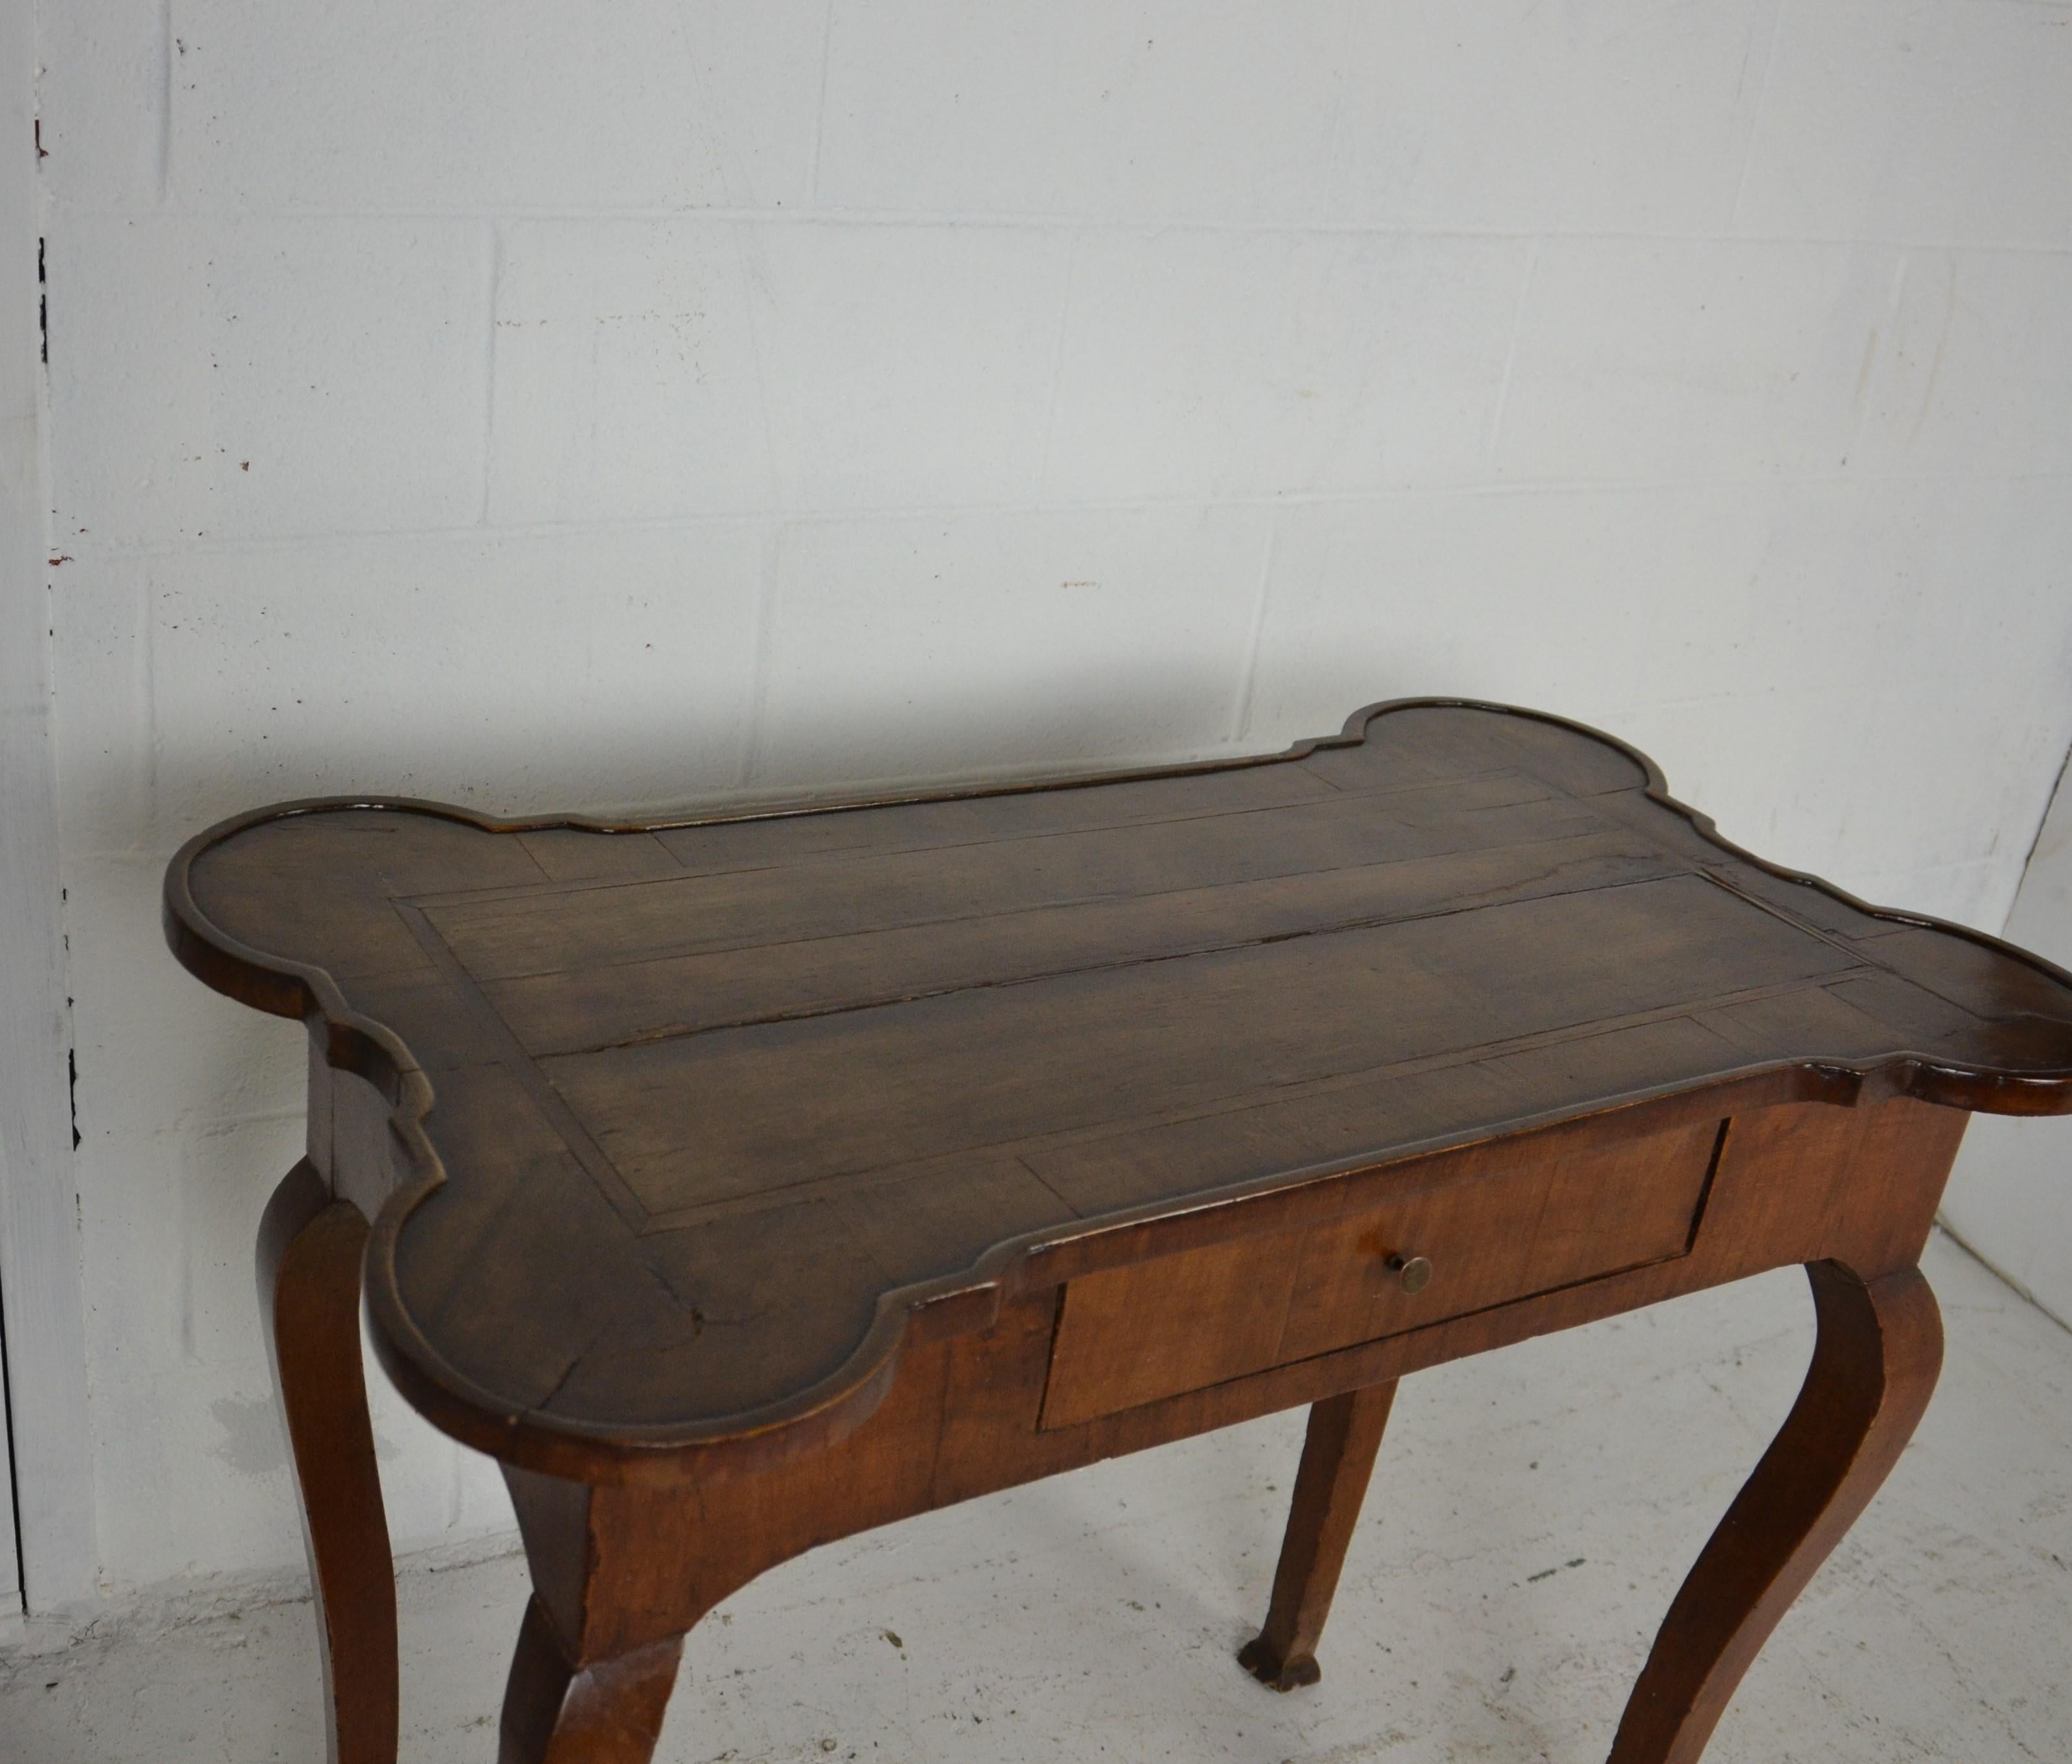 An early walnut side table with a nicely shaped top. Cabriole legs with worn pad feet, early 19th century.